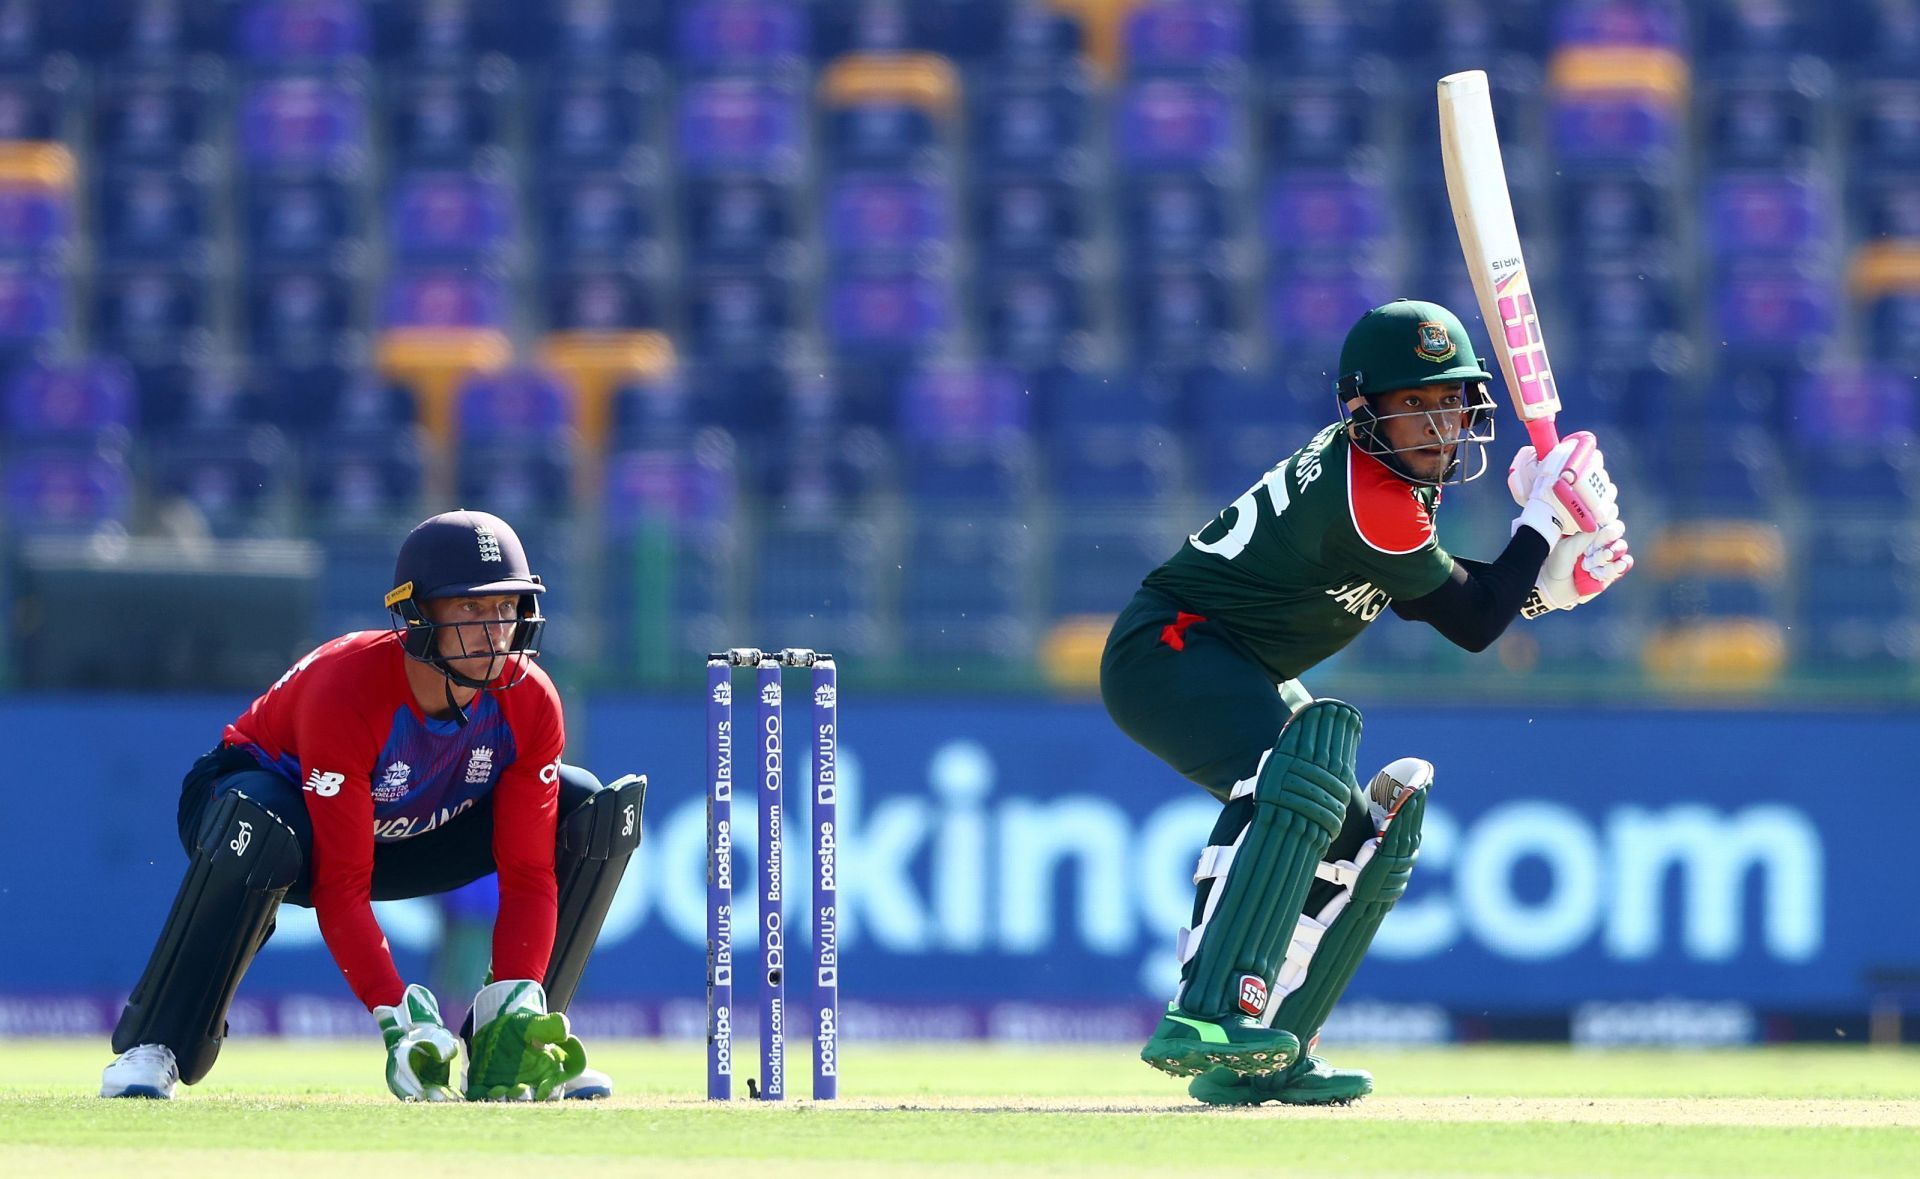 Bangladesh have preferred to set a target in the T20 World Cup 2021